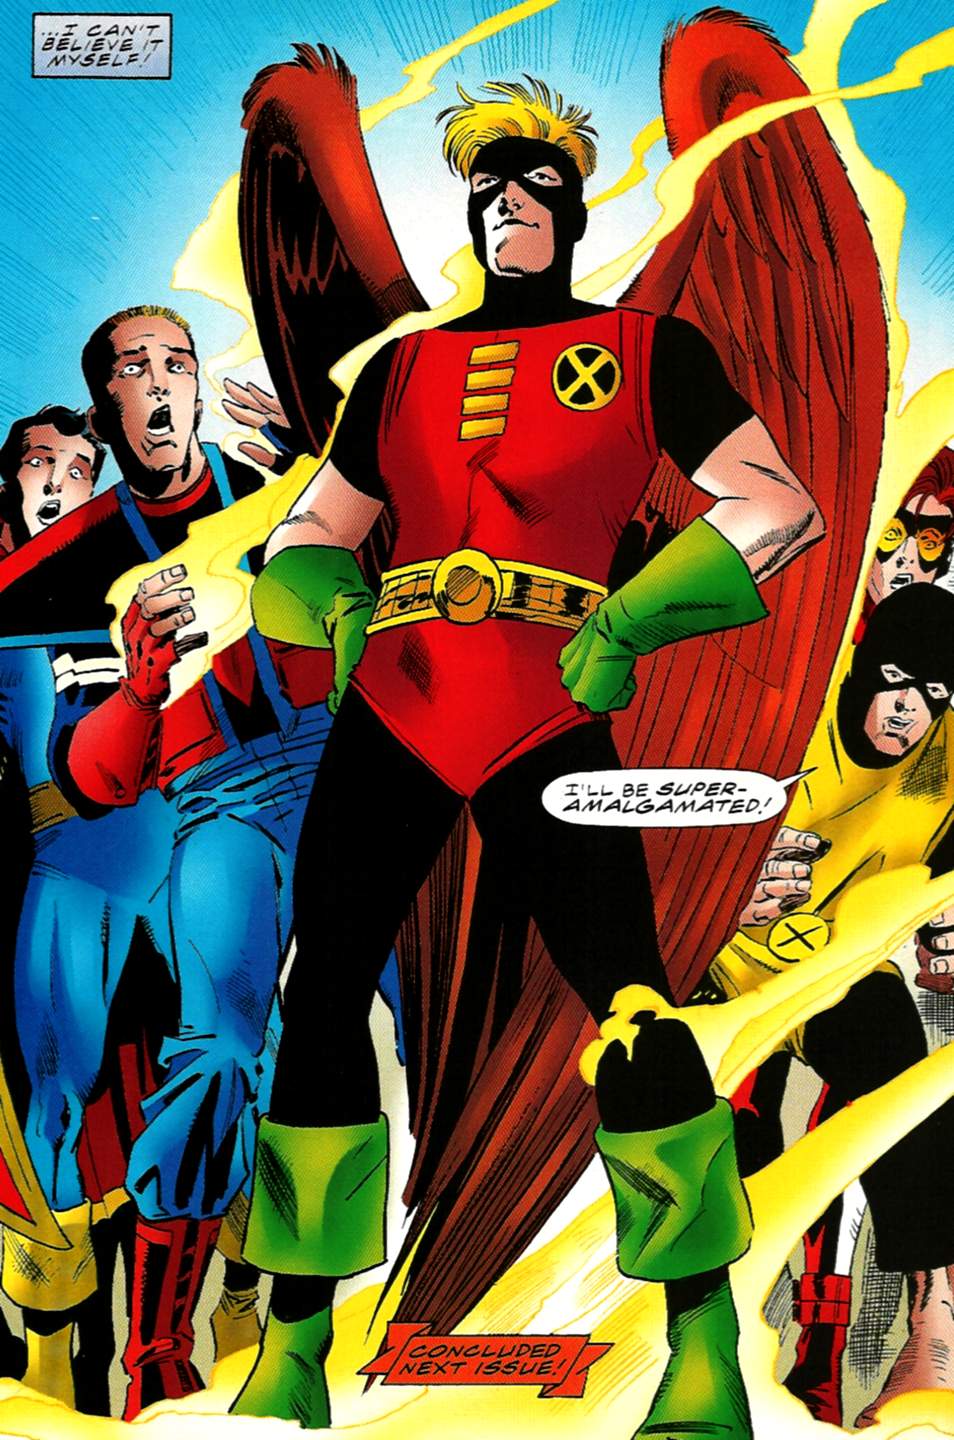 Access discovers his ability to fuse individuals, courtesy of Angel and Tim Drake in Unlimited Access Vol. 1 #3 "The Greatest Heroes of All Time!" (1998), Marvel Comics / DC Comics. Words by Karl Kesel, art by Pat Olliffe.